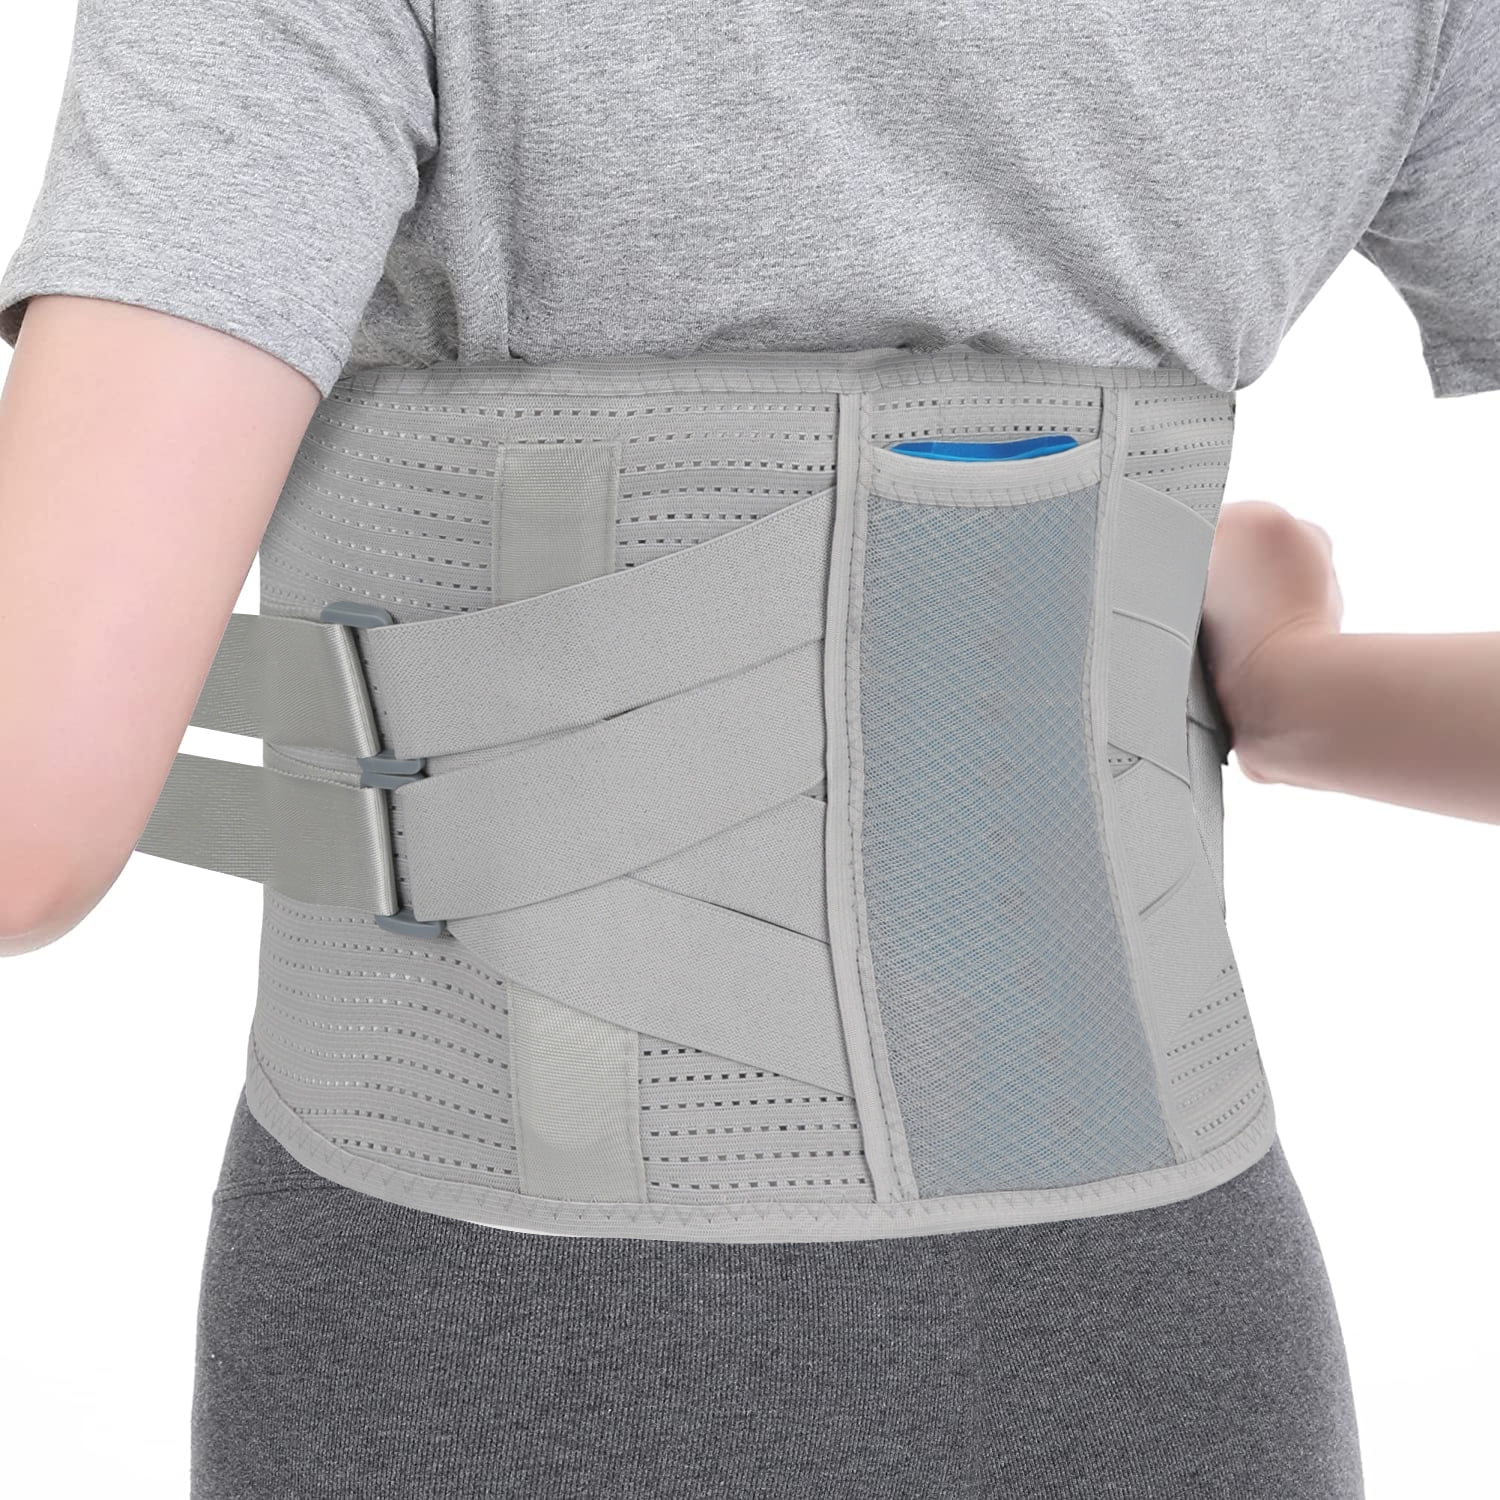 FITVALEN Lower Back Brace Pain Relief - Lumbar Support Belt for